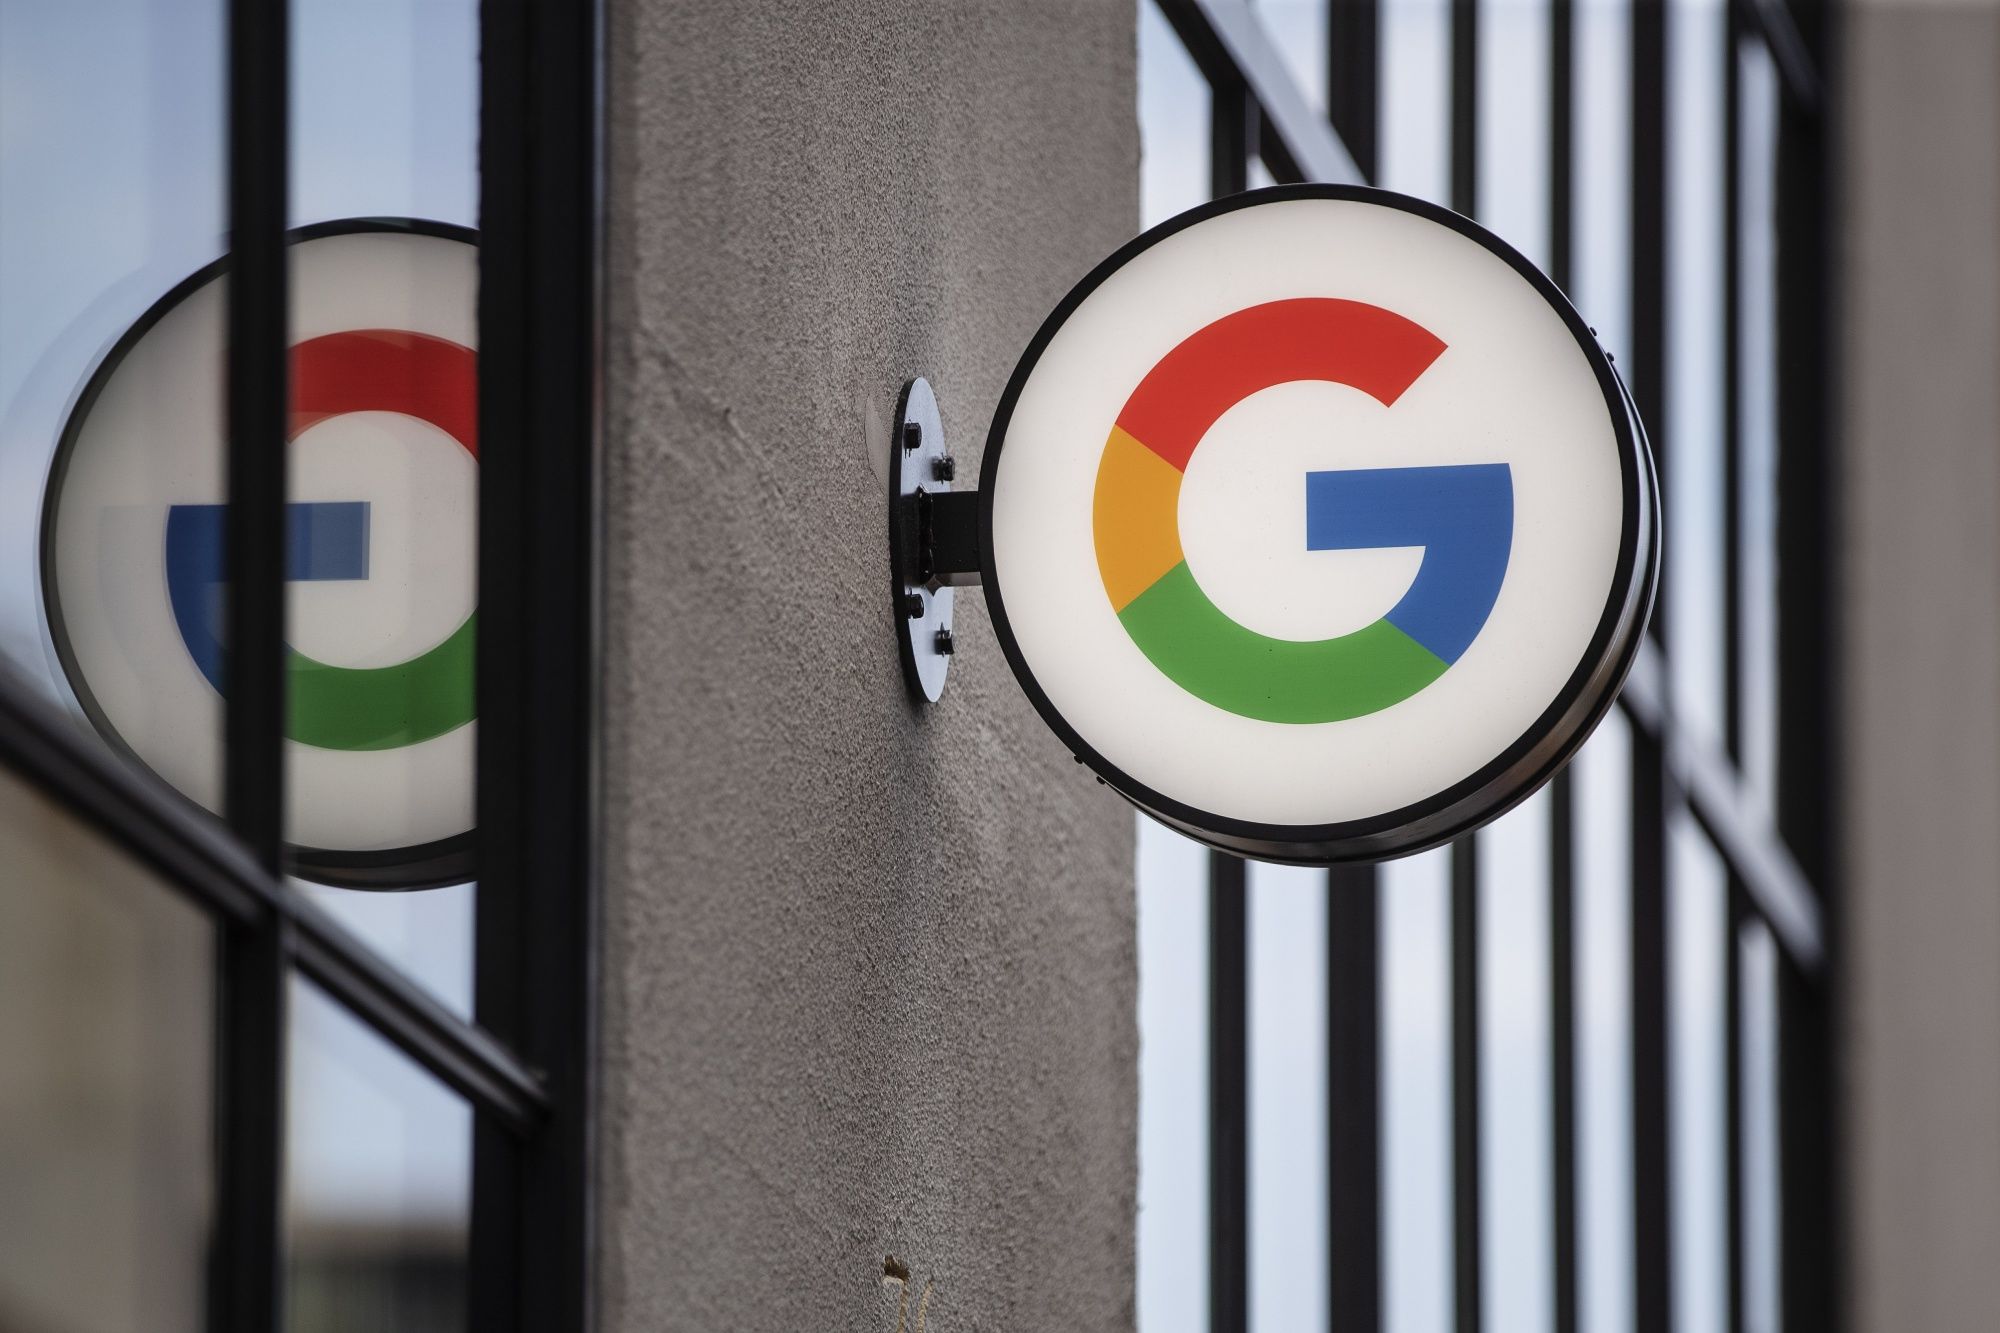 A logo outside the Google Store Chelsea in New York, U.S., on Friday, May 28, 2021. The Google Store will display and sell a variety of product such as Pixel phones, Nest smart home devices, Fitbit trackers, Pixelbooks, and more.